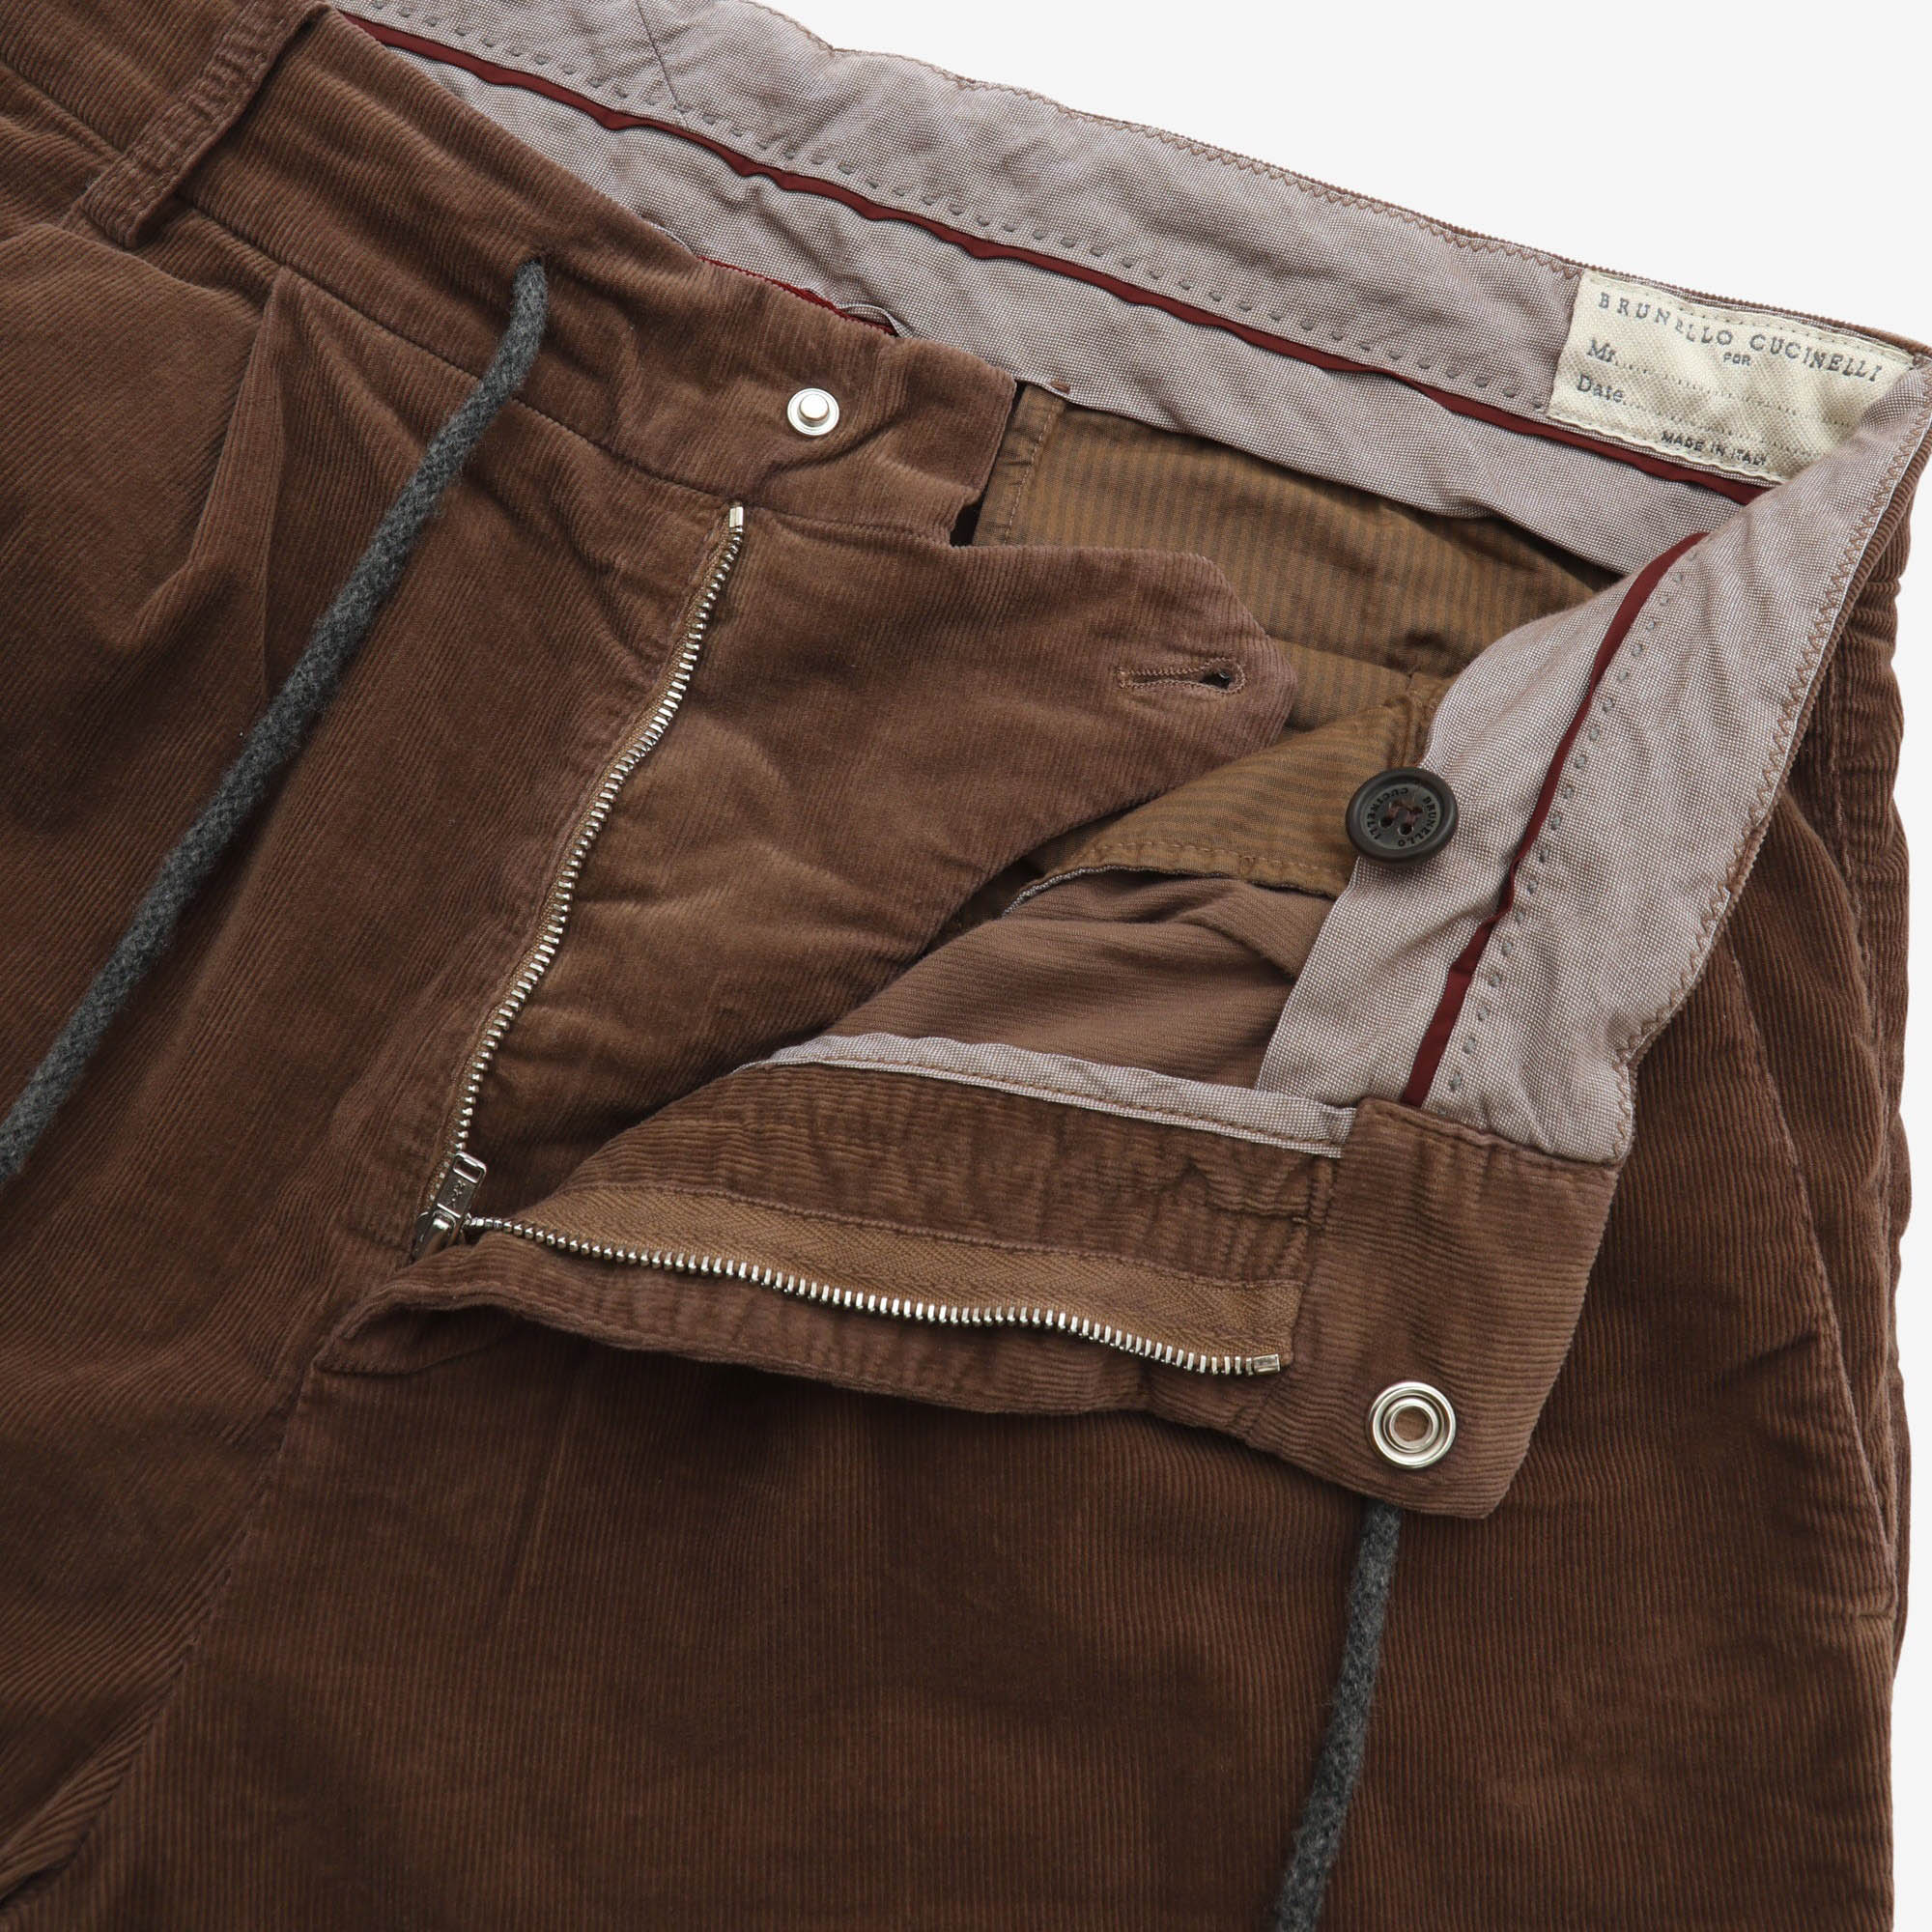 Leisure Fit Corduroy Trousers